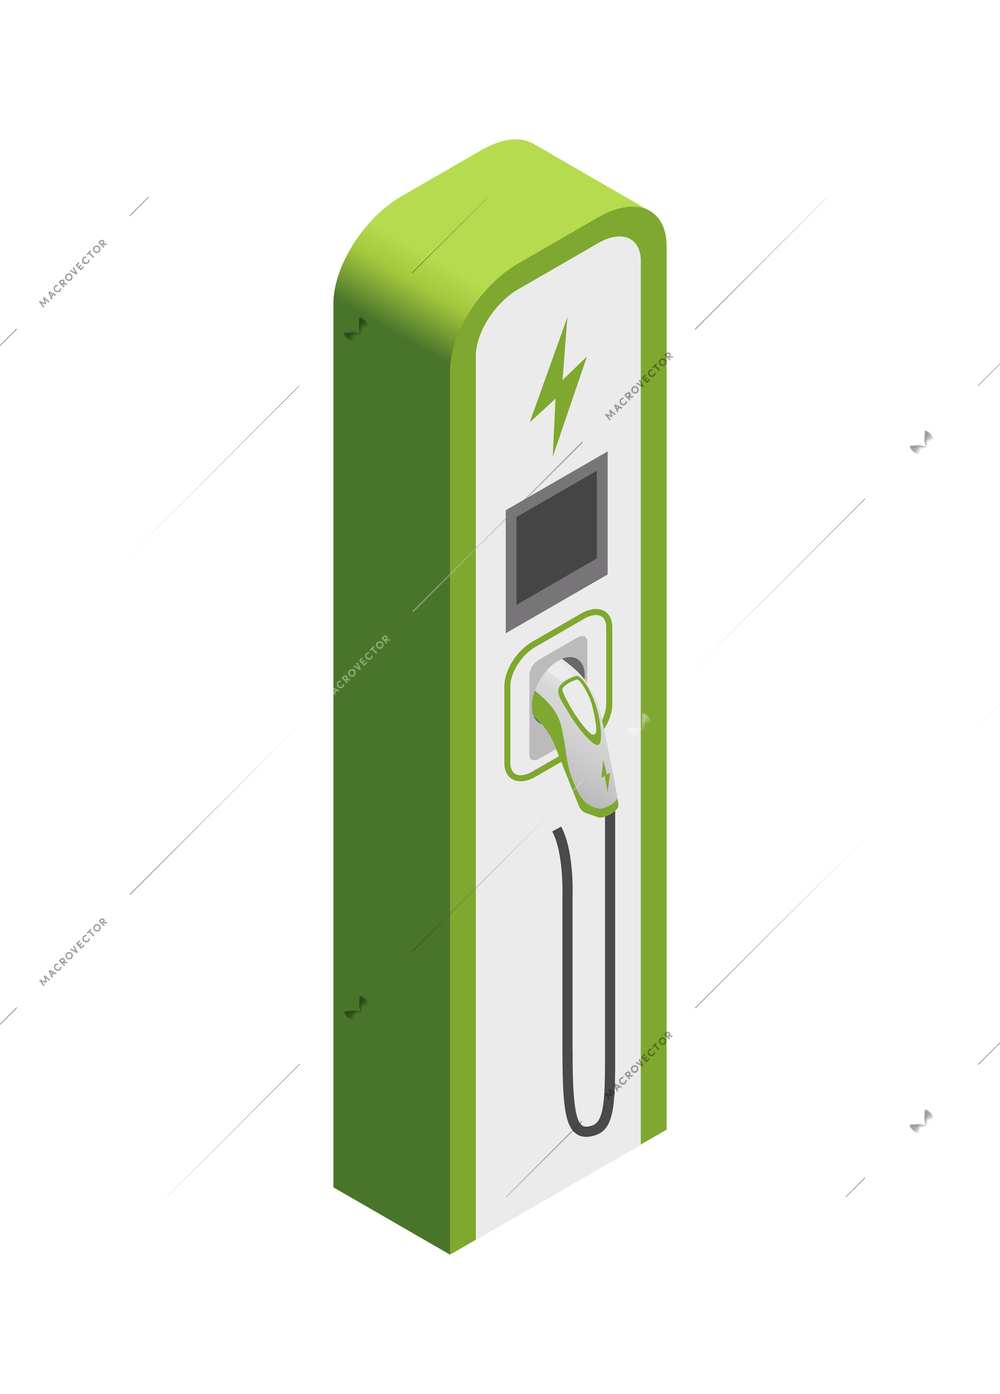 Gas station isometric composition with isolated image of charging column for electric vehicles on blank background vector illustration